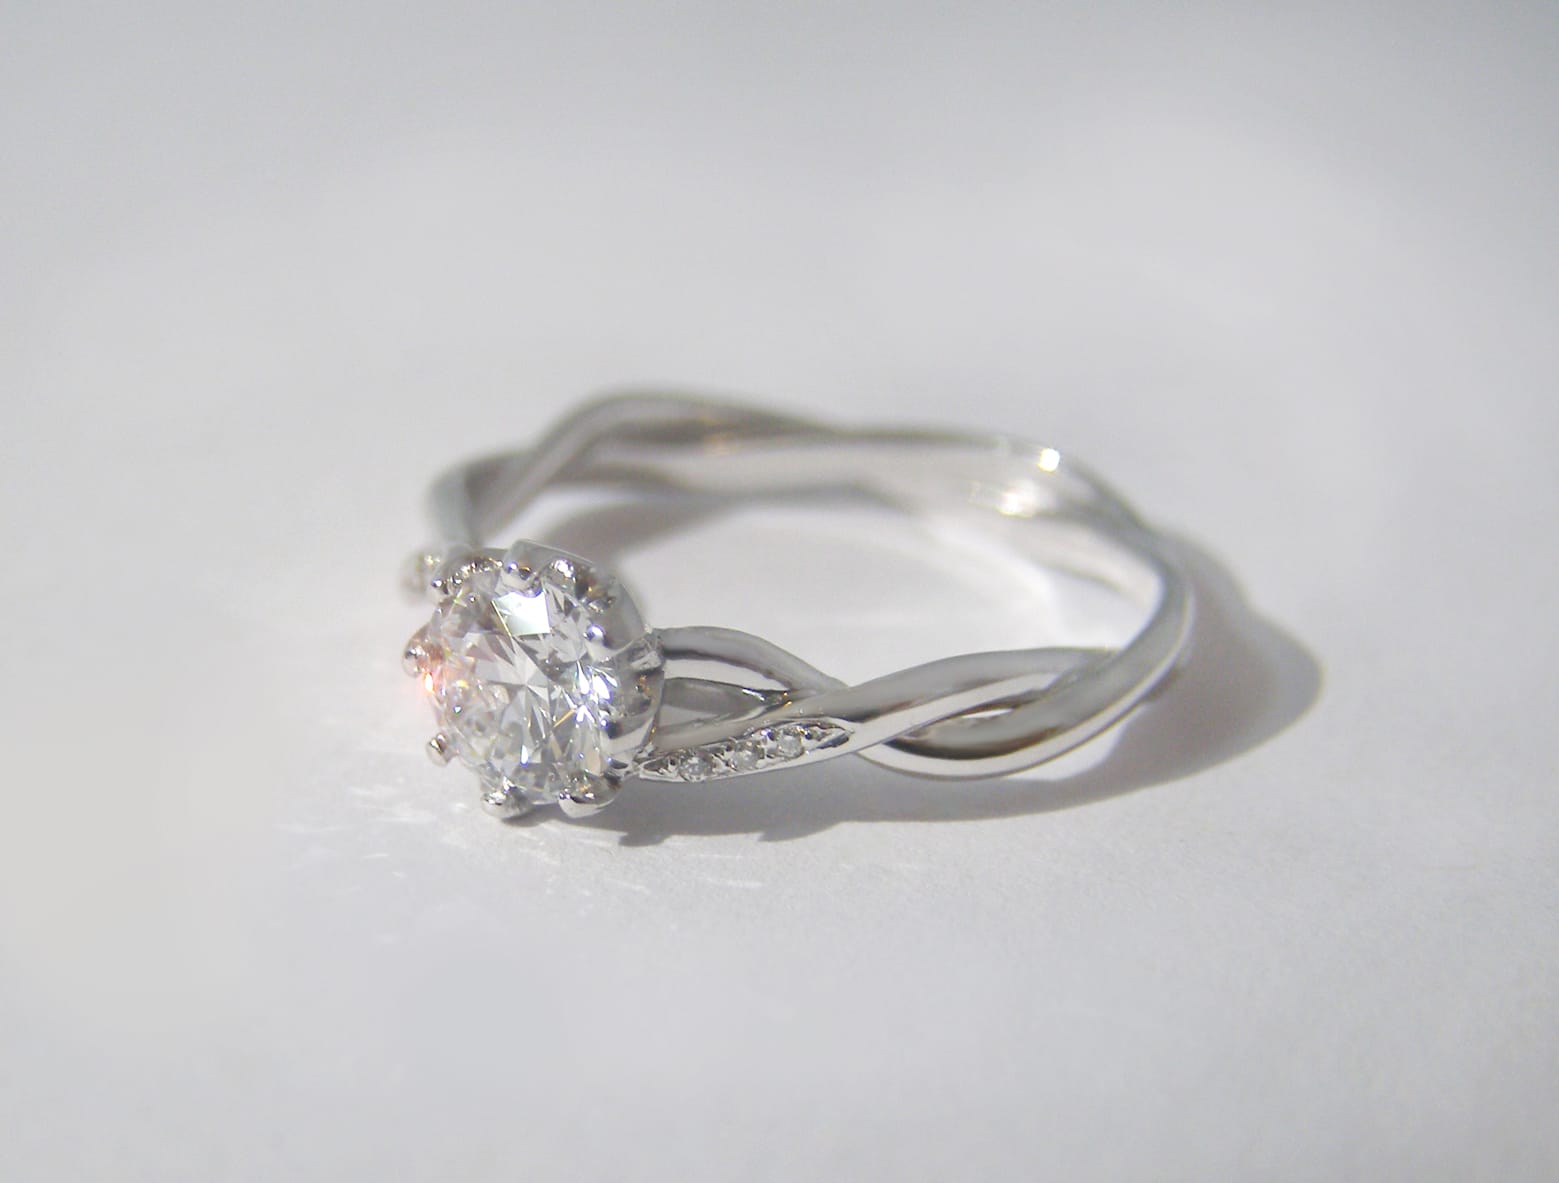 Twisted platinum band with central created diamond and small diamonds